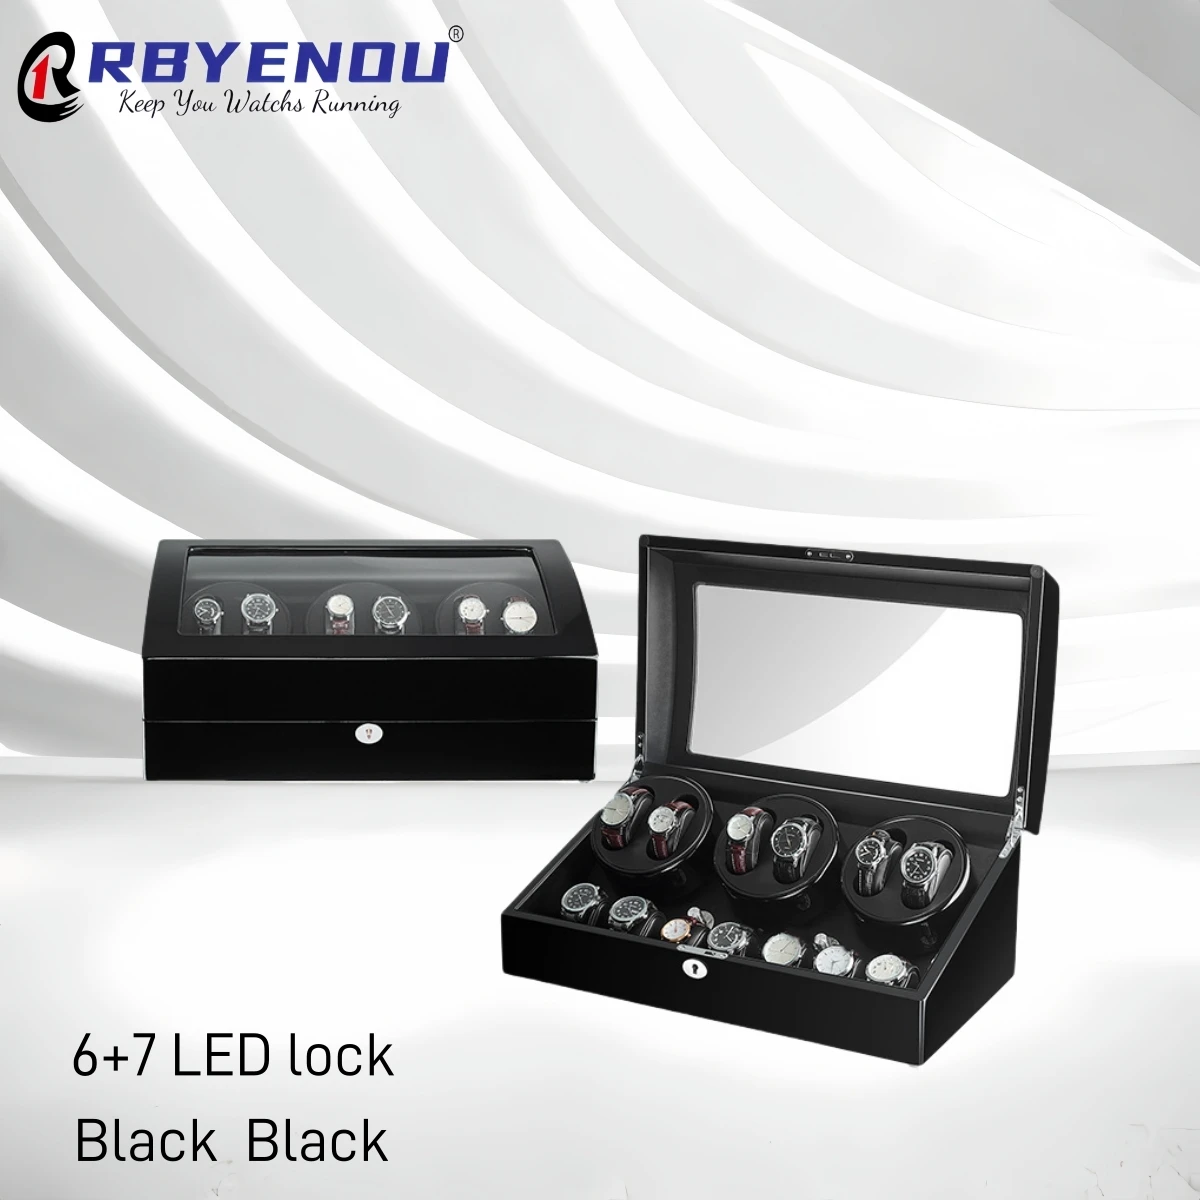 For Rolex Luxury Watchs Display Box Rotatable Watch Winders Box LED Lock Watch Case 7+6 WatchWinder Personalized customized LOGO